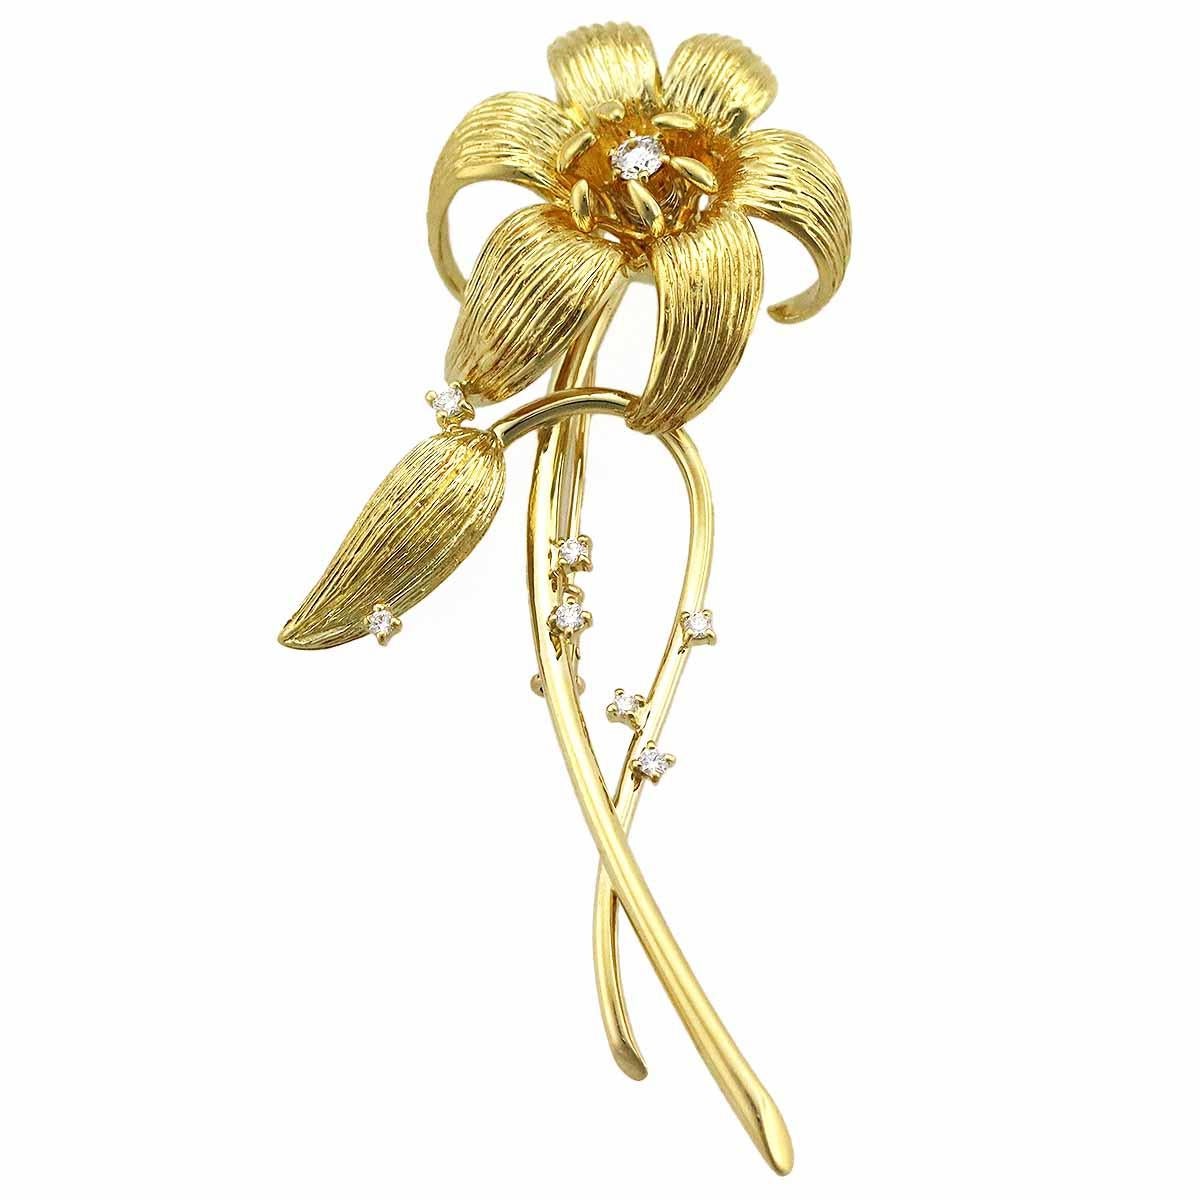 Brand:POLA
Name:Diamond flower brooch
Material:8P diamond(0.23ct), 750 K18 YG yellow gold
Weight:17.6g(Approx）
Size（inch）:H70mm×W25mm / H2.75in×W0.98(Approx）
Comes with: Our shop original box